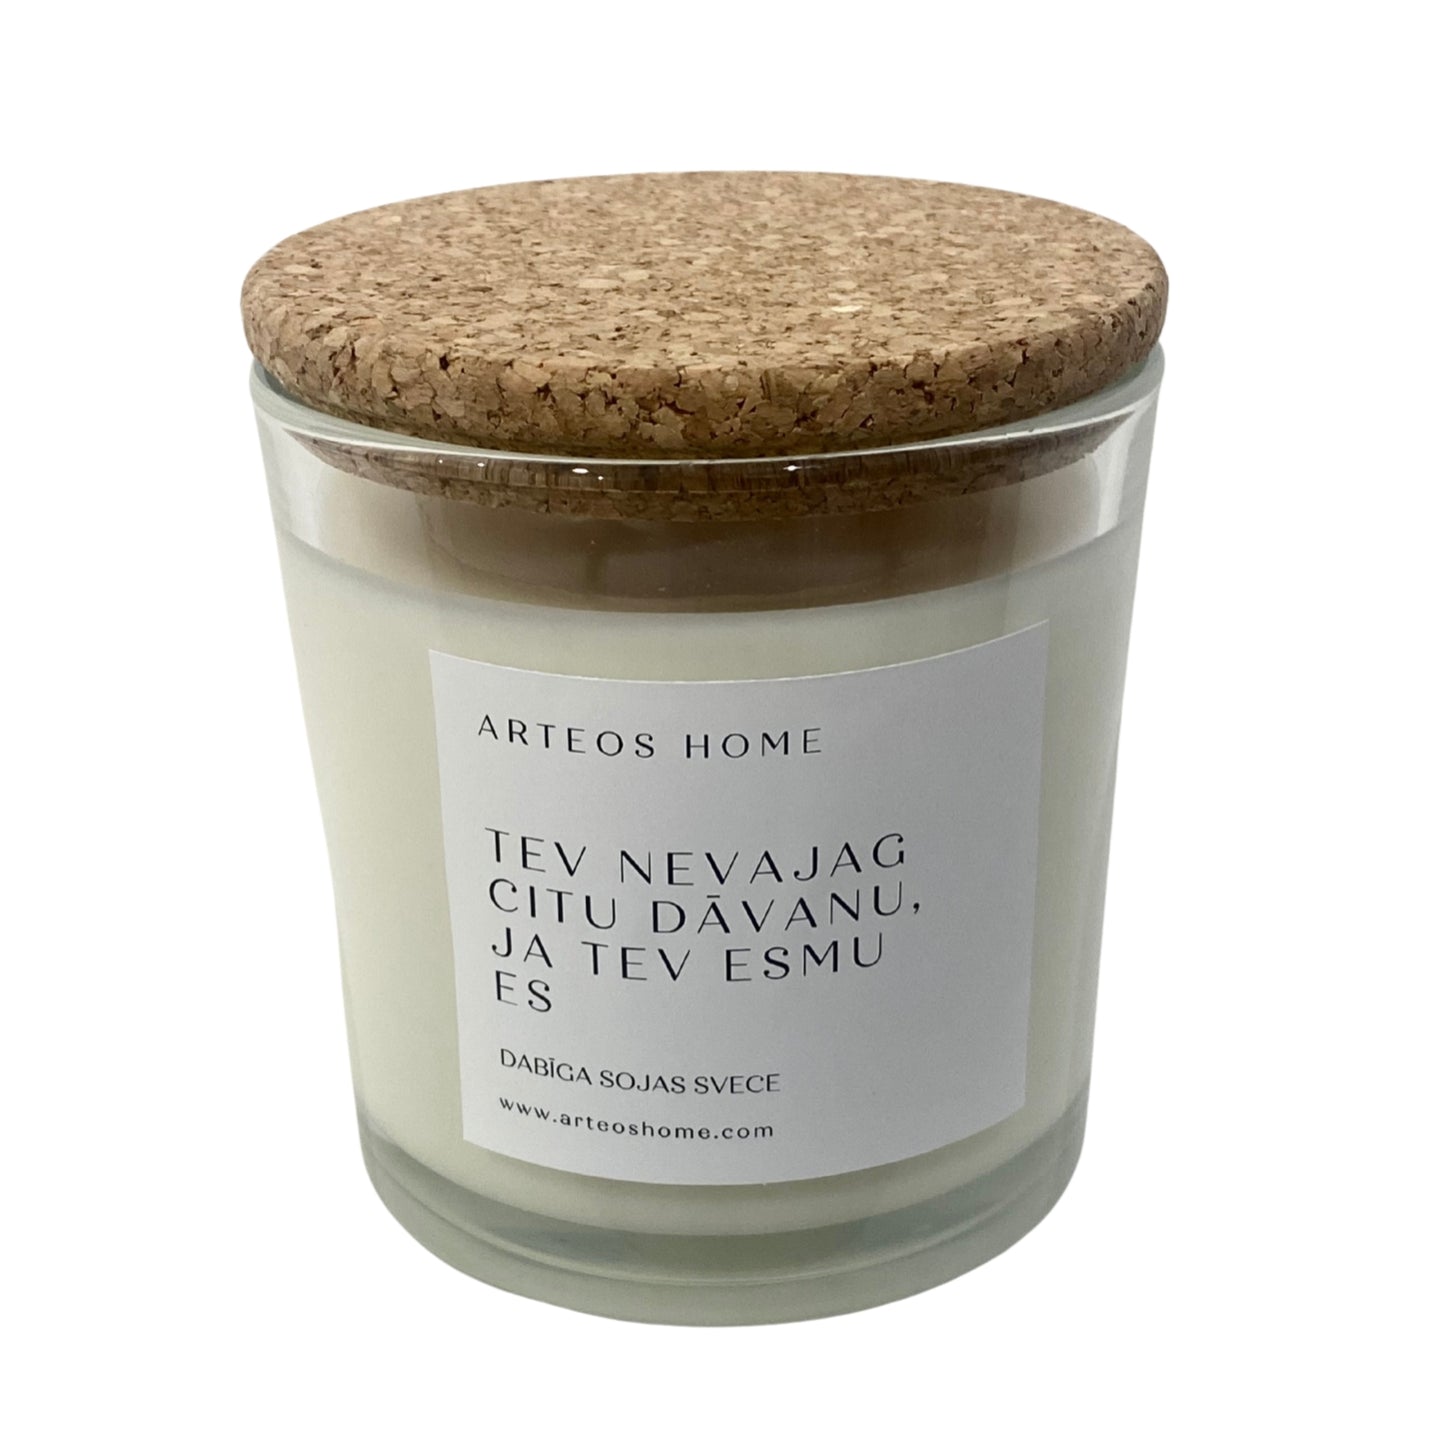 Arteos Home soy candle with a story